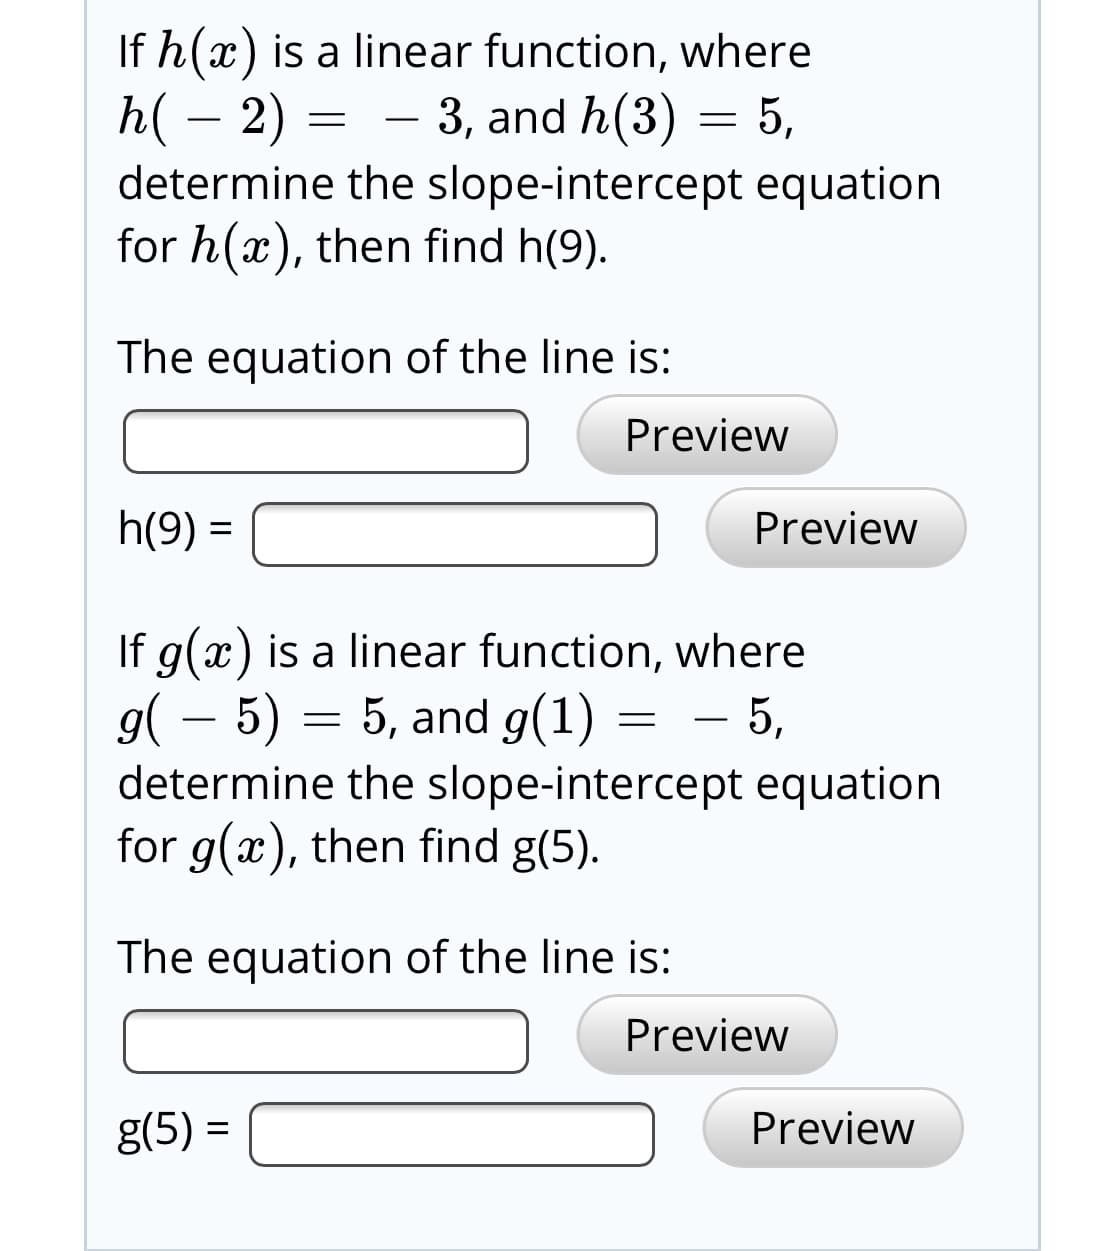 If h(x) is a linear function, where
h( – 2) = - 3, and h(3) = 5,
determine the slope-intercept equation
for h(x), then find h(9).
The equation of the line is:
Preview
h(9) =
Preview
If g(x) is a linear function, where
g( – 5) = 5, and g(1)
determine the slope-intercept equation
for g(x), then find g(5).
= - 5,
The equation of the line is:
Preview
g(5) =
Preview
